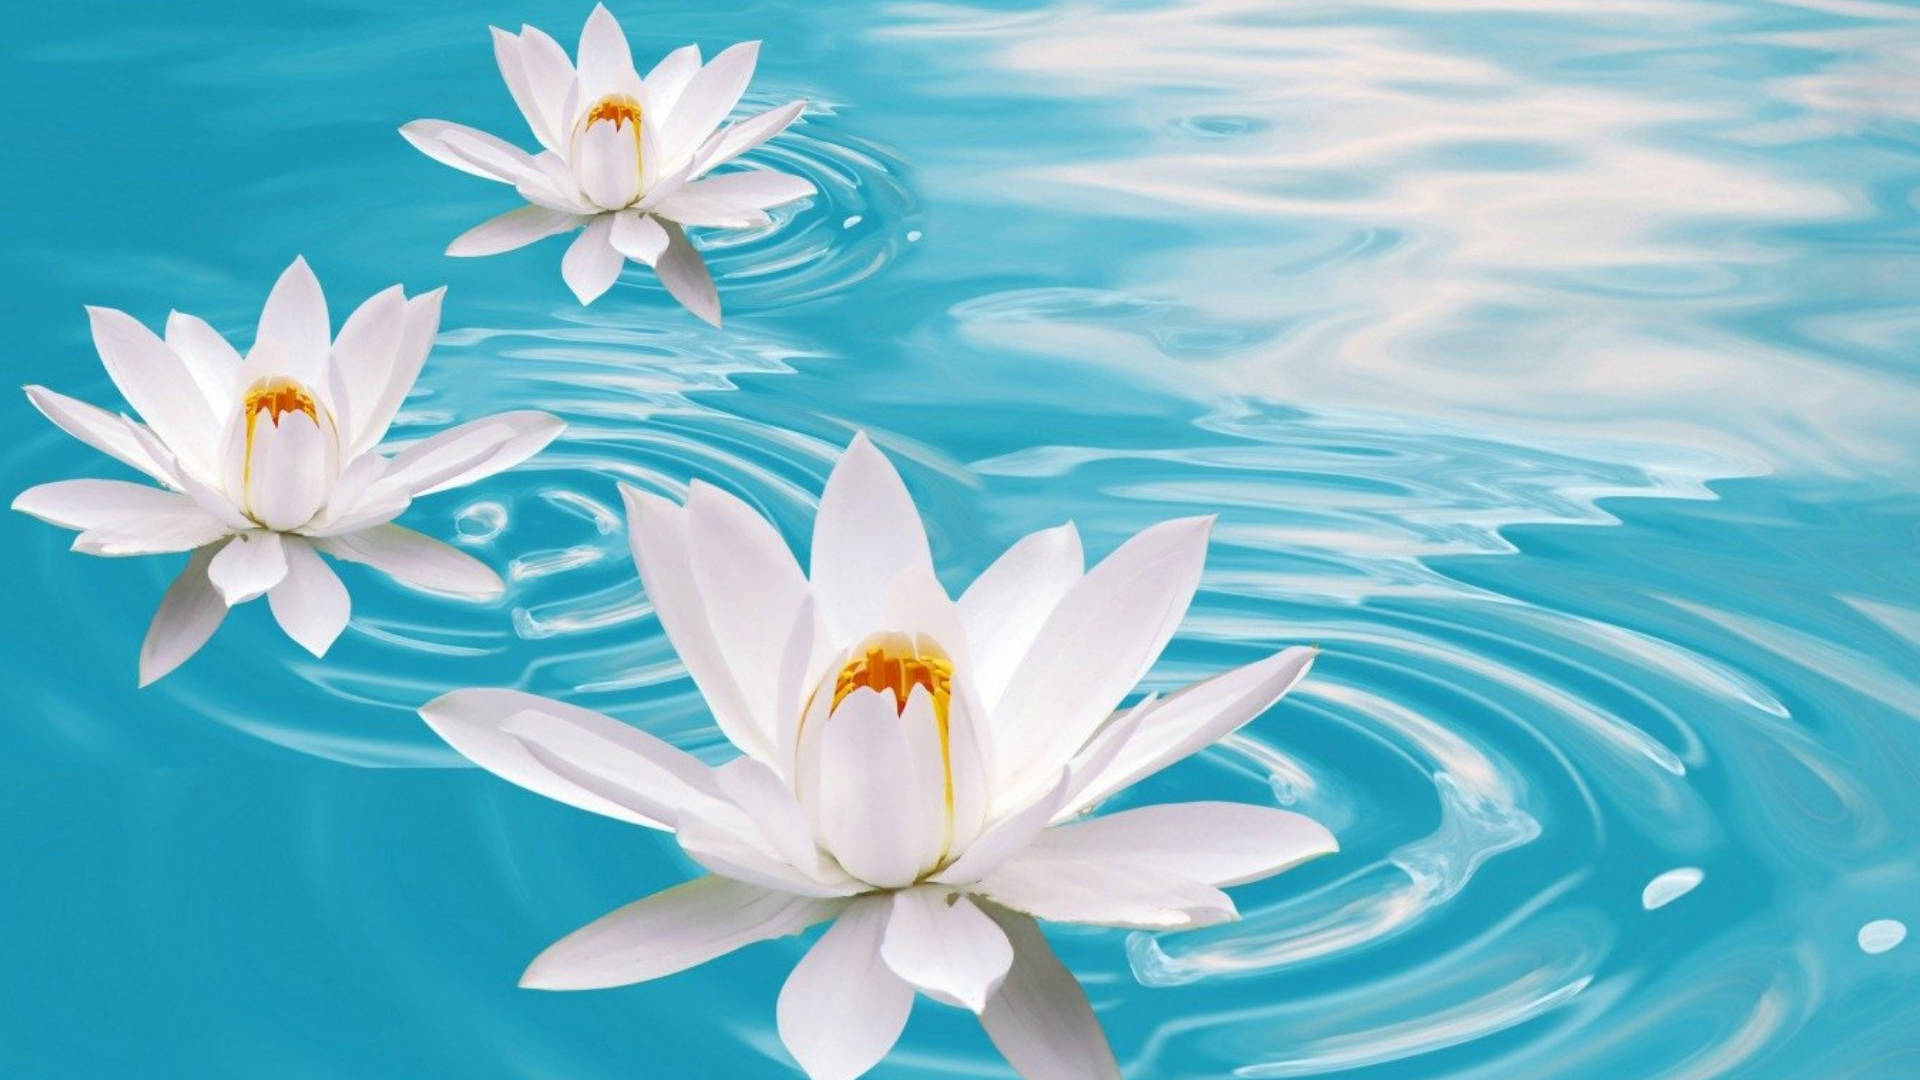 1920x1080 Download Three White Water Lilies Wallpaper